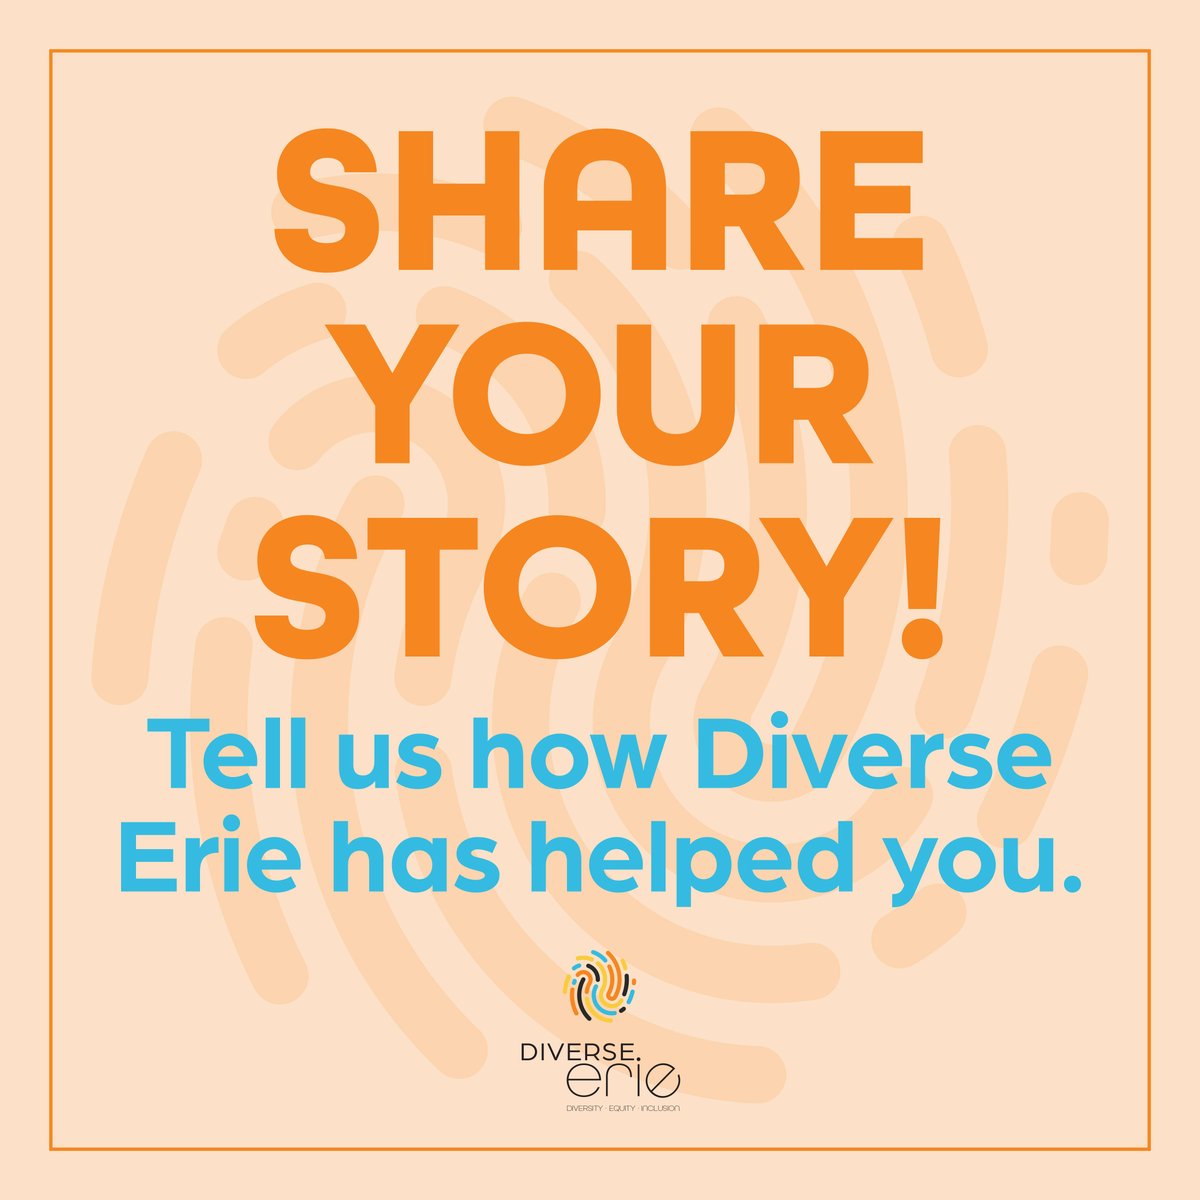 We want to hear YOUR story! Click to tell us how Diverse Erie has helped you: diverseerie.org/share-your-sto…

#DiverseErie #DEI #diversity #equity #inclusion #education #CelebrateDiversityMonth